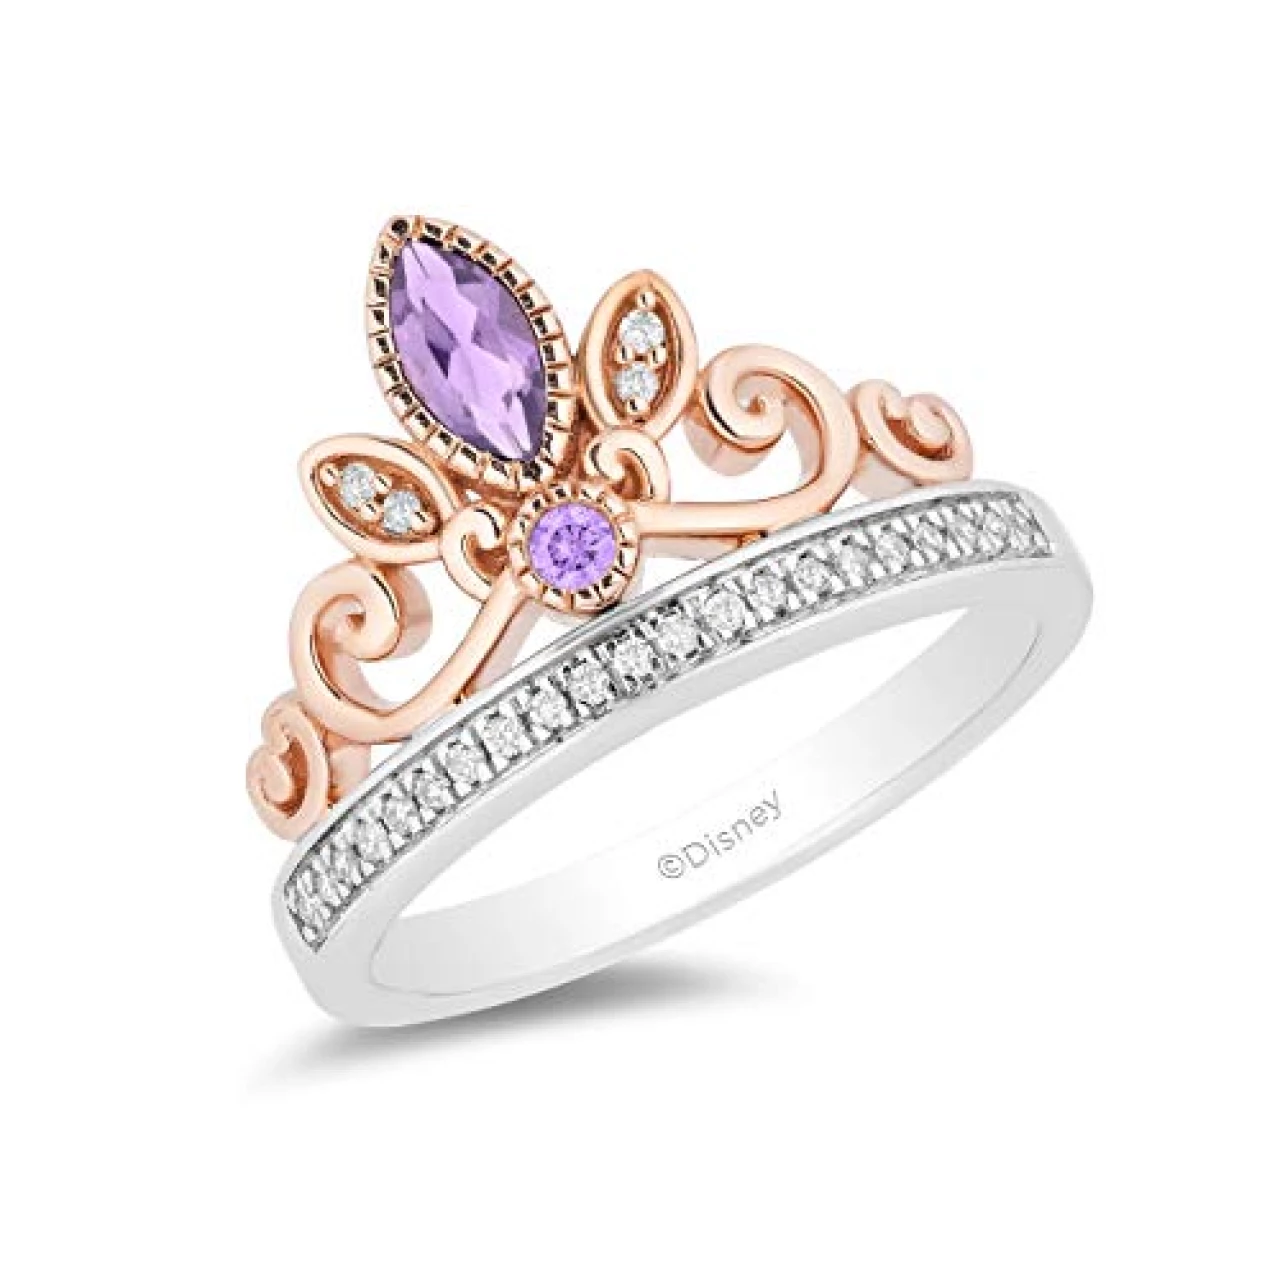 Jewelili Enchanted Disney Fine Jewelry 14K Rose Gold Over Sterling Silver With 1/10 Cttw Diamond Rose-De-France Rapunzel Tiara Ring, Size 5